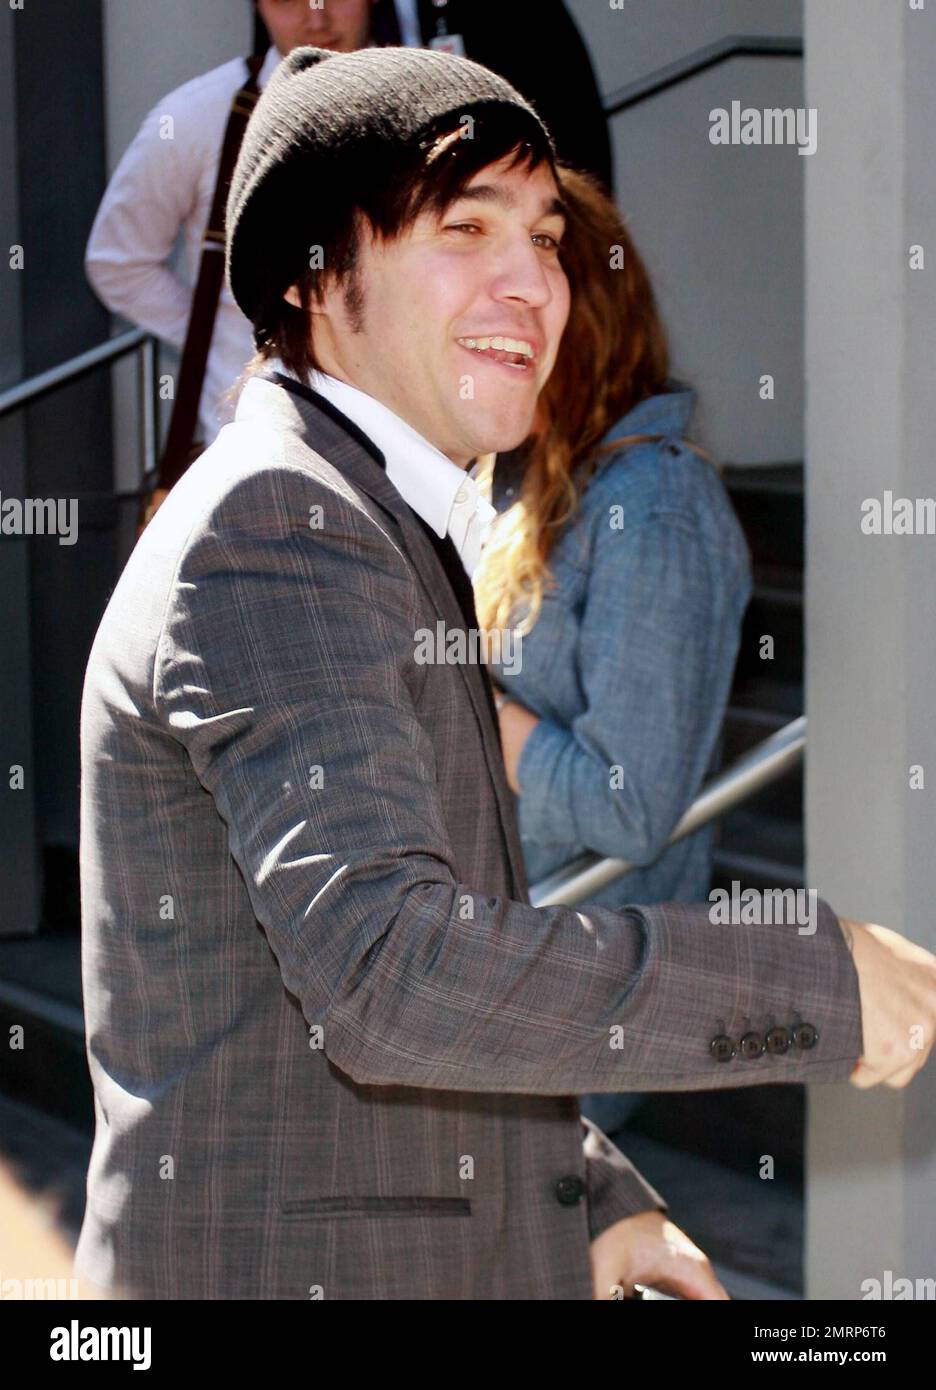 Pete Wentz arrives to CNN studios for the Larry King Live: Disaster in the Gulf Telethon hosted by American Idol's Ryan Seacret.  Celebrities took calls throughout the two-hour show to help the people, animals and wildlife affected by the continuing oil leak in the Gulf of Mexico.  The event reportedly raised $1.7 million with donations going to the United Way, National Wildlife Federation or The Nature Conservancy.  The British Petroleum-leased oil well off the coast of Louisiana, which busted on April 20, has yet to be fully contained. Los Angeles, CA. 06/21/10. . Stock Photo